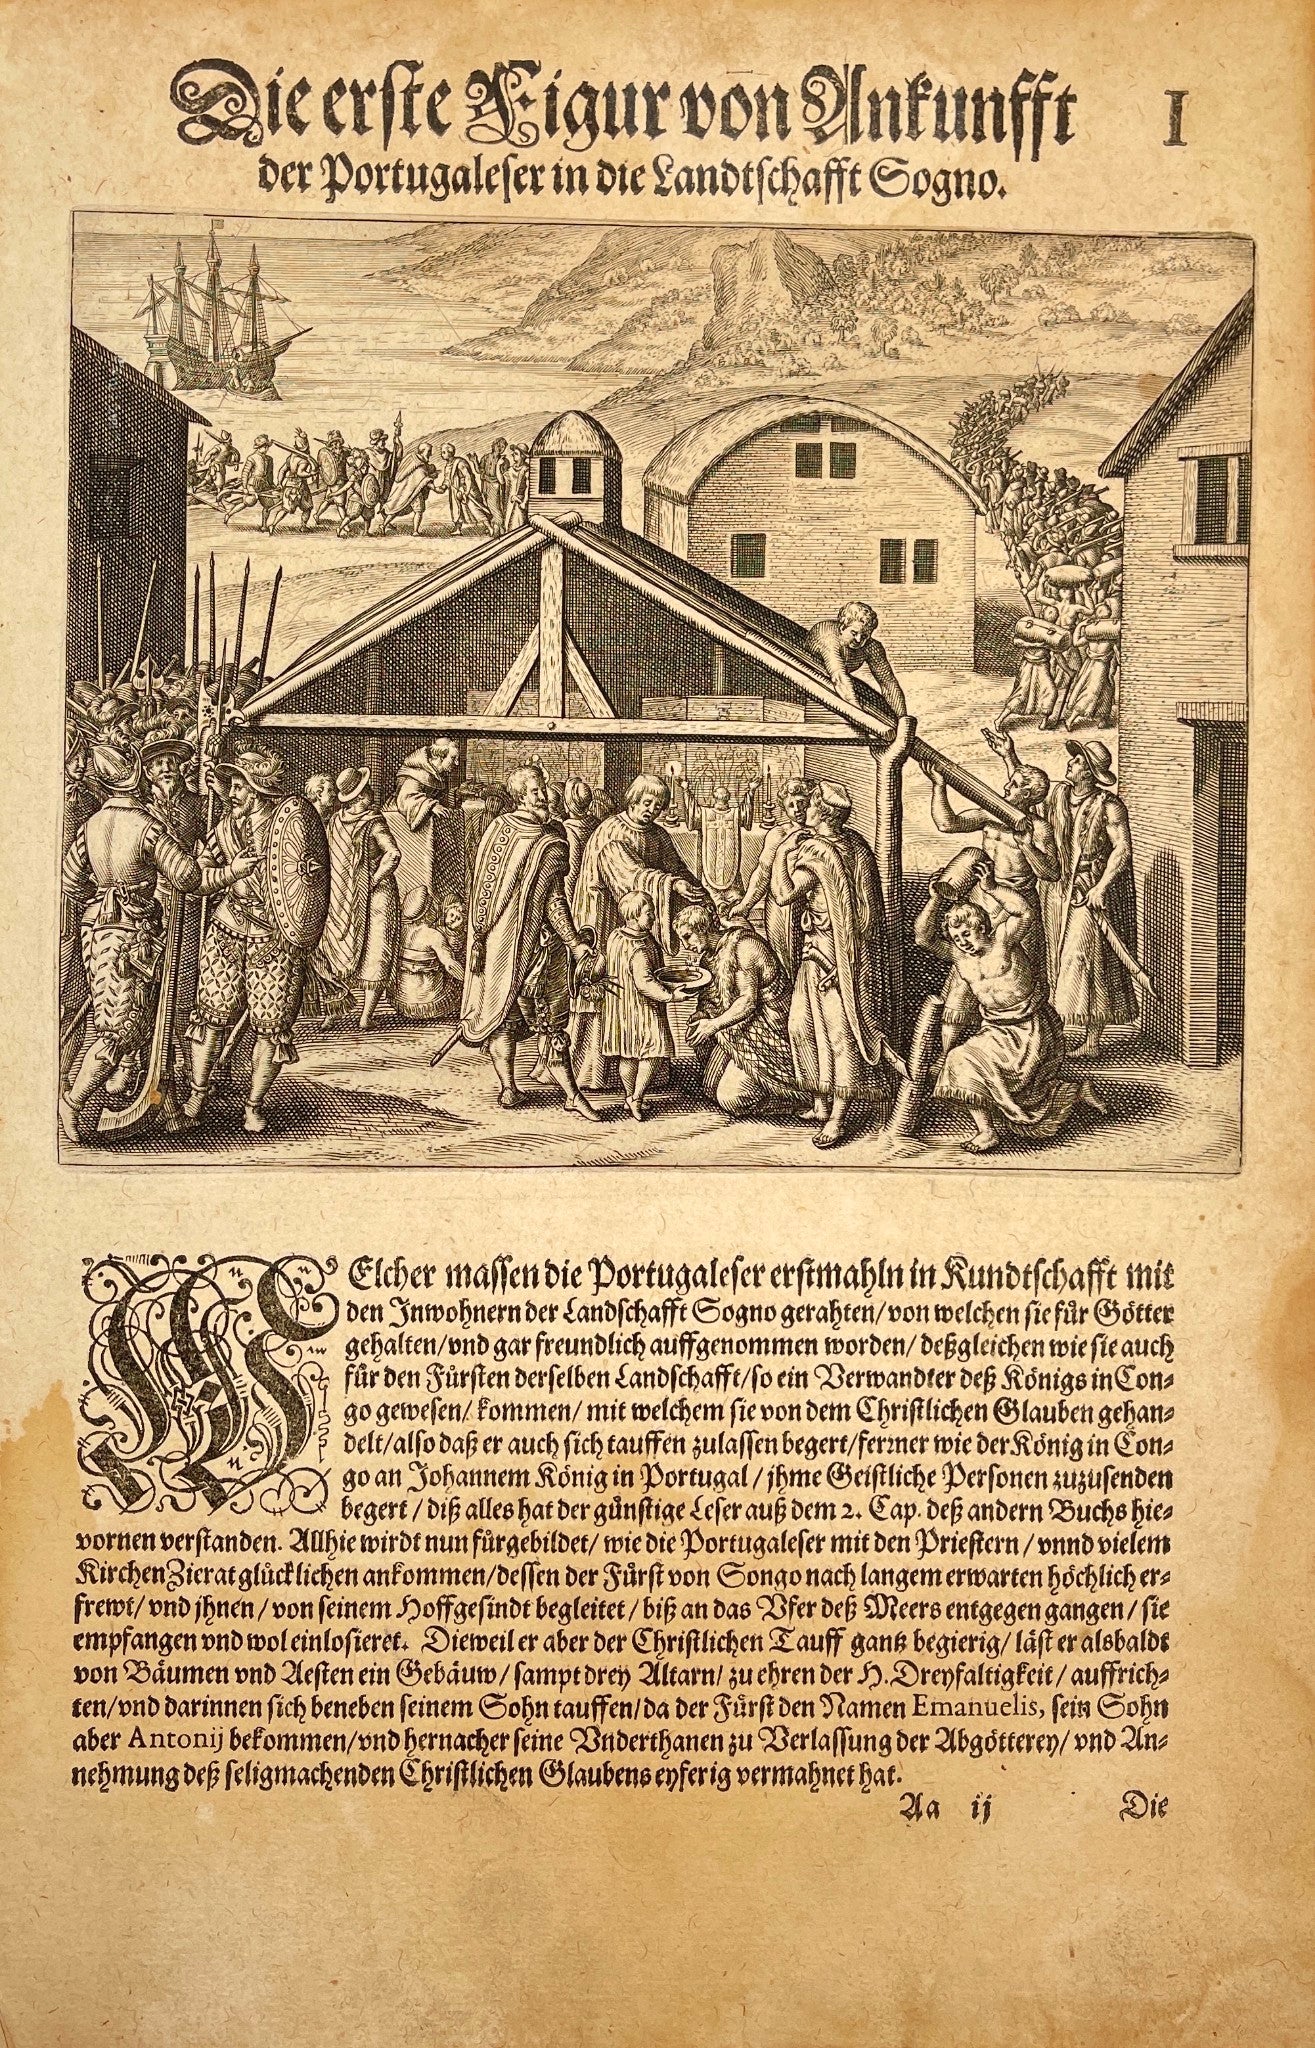 Antique Print - Theodor de Bry - "Conversion of the King of the Congo" - Germany - Dahlströms Fine Art